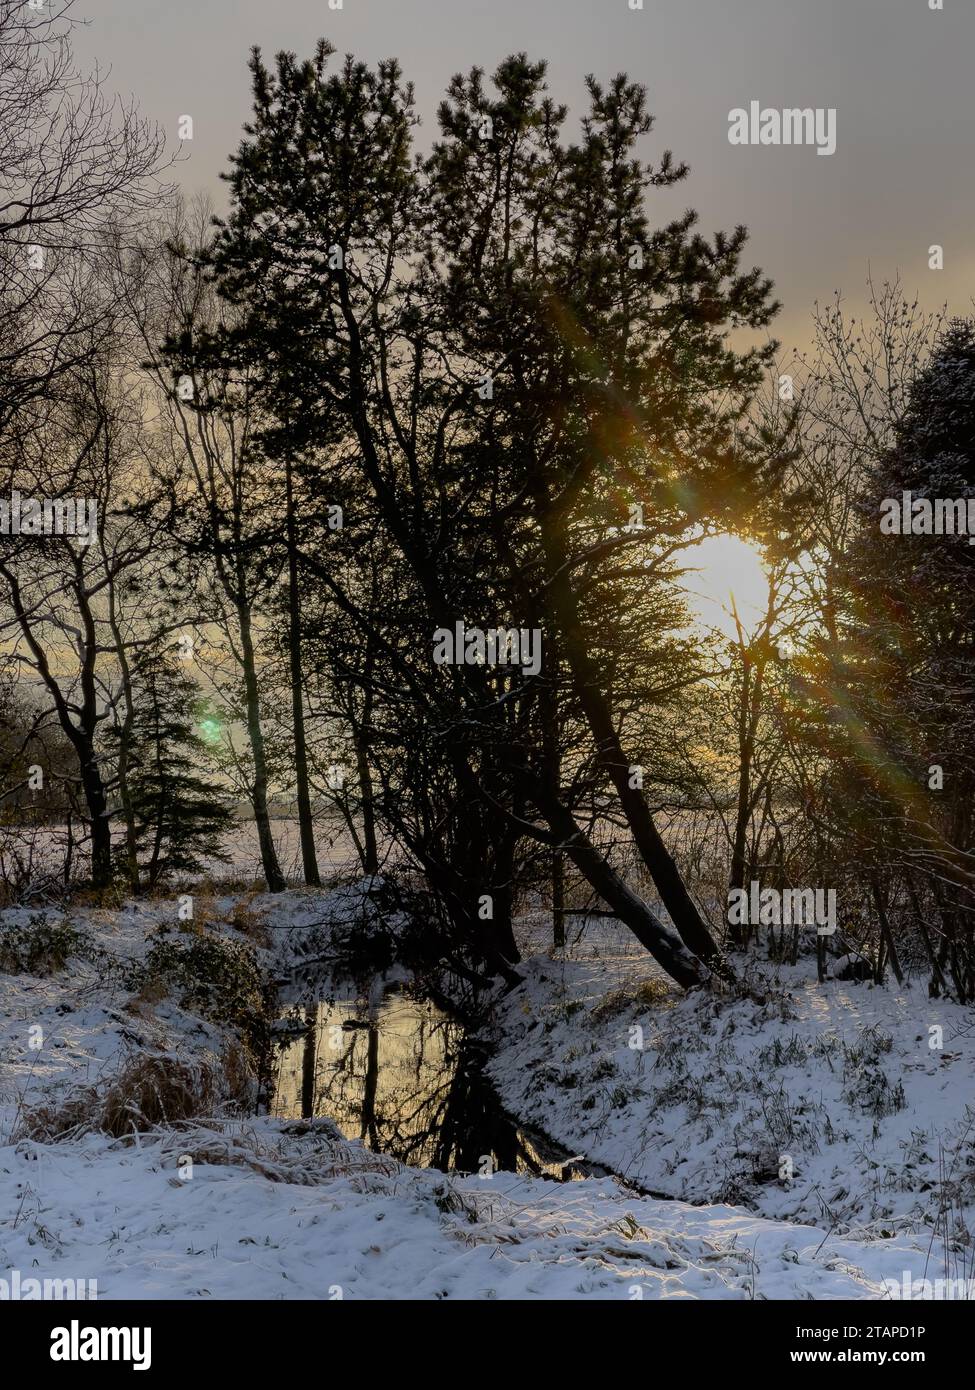 The afternoon sun shines through a stand of trees on the snowy banks of a small creek reflecting golden in the water's surface Stock Photo